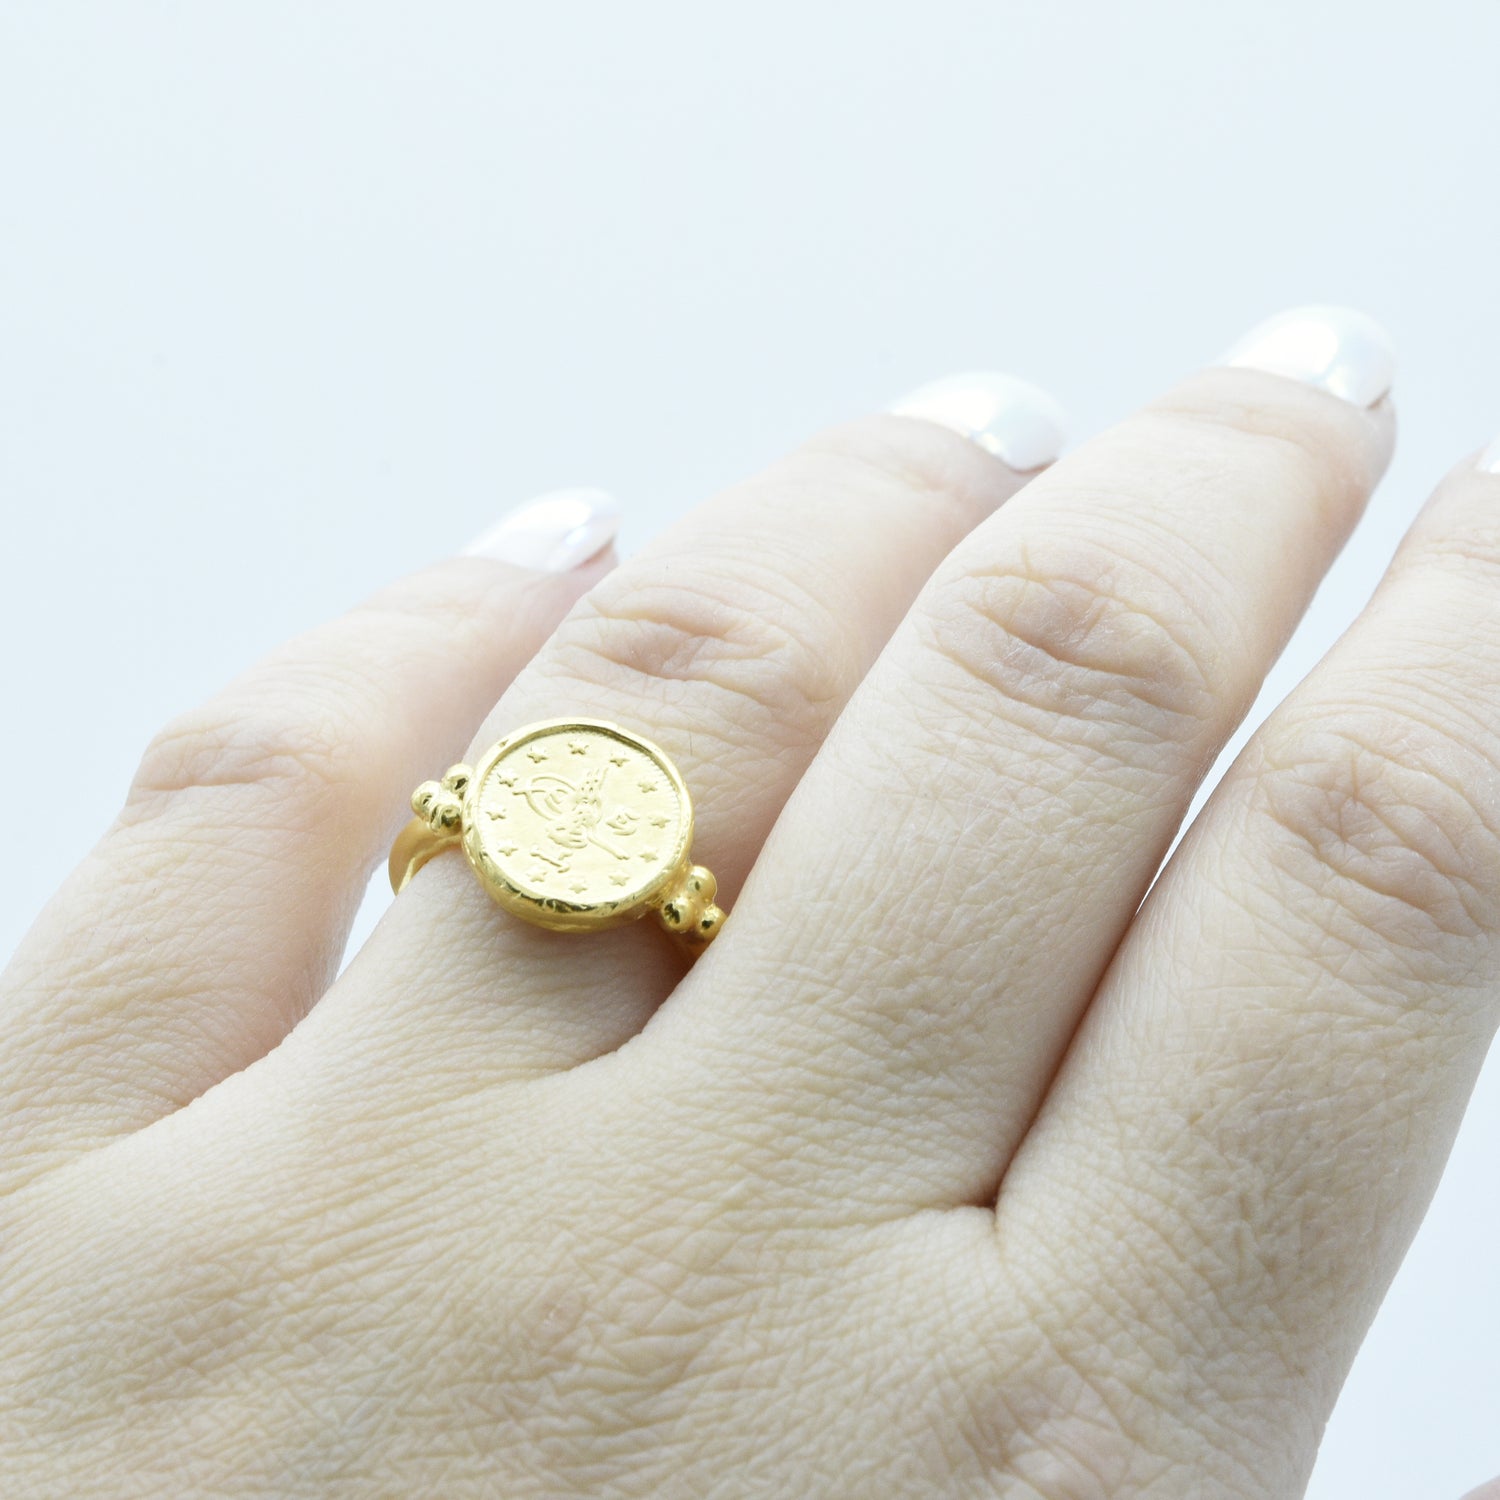 Aylas Arabic Calligraphy ring - 21ct Gold plated 925 silver - Handmade in Ottoman Style by Artisan